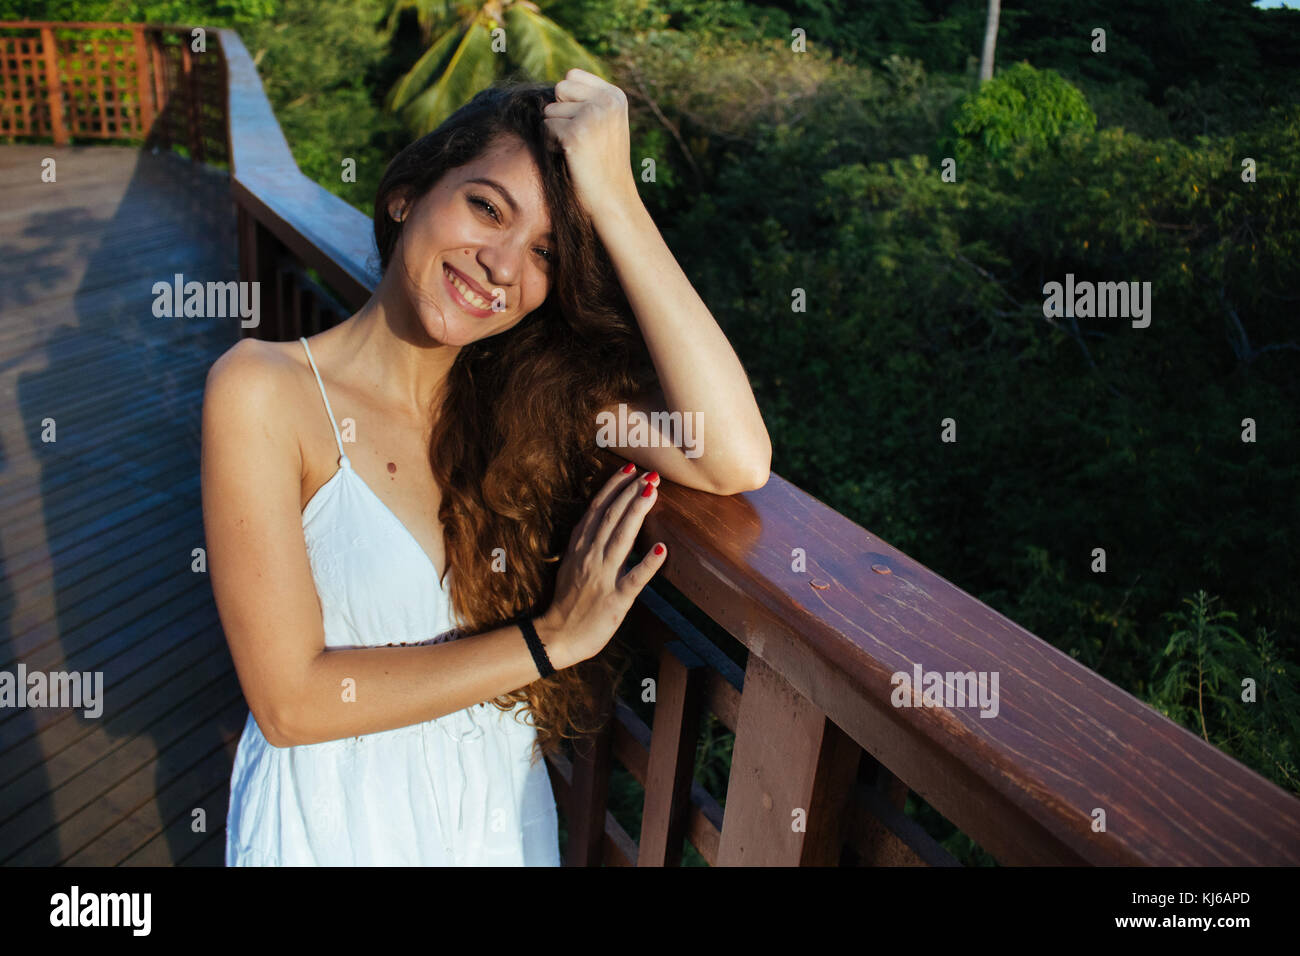 Young woman wearing white dress, on the outdoor urban park Stock Photo